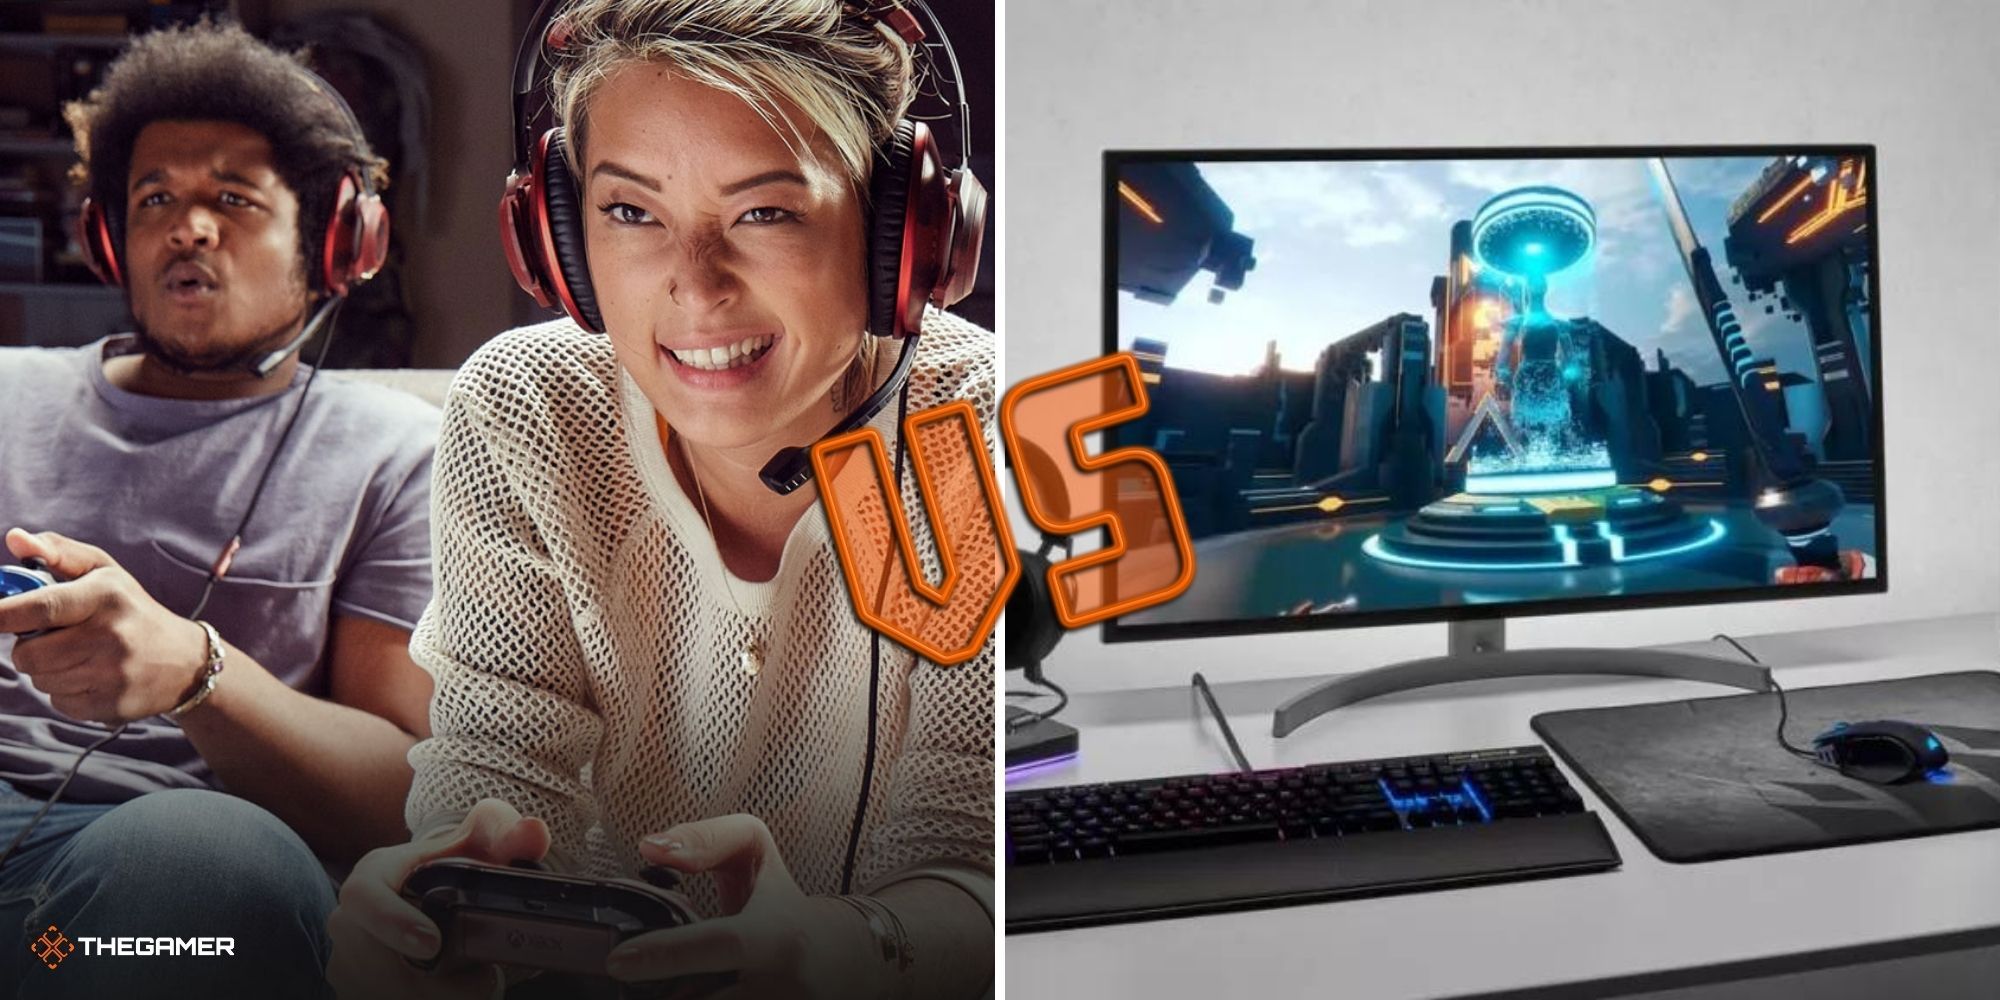 Players holding controllers on left, PC setup on right, VS in the centre